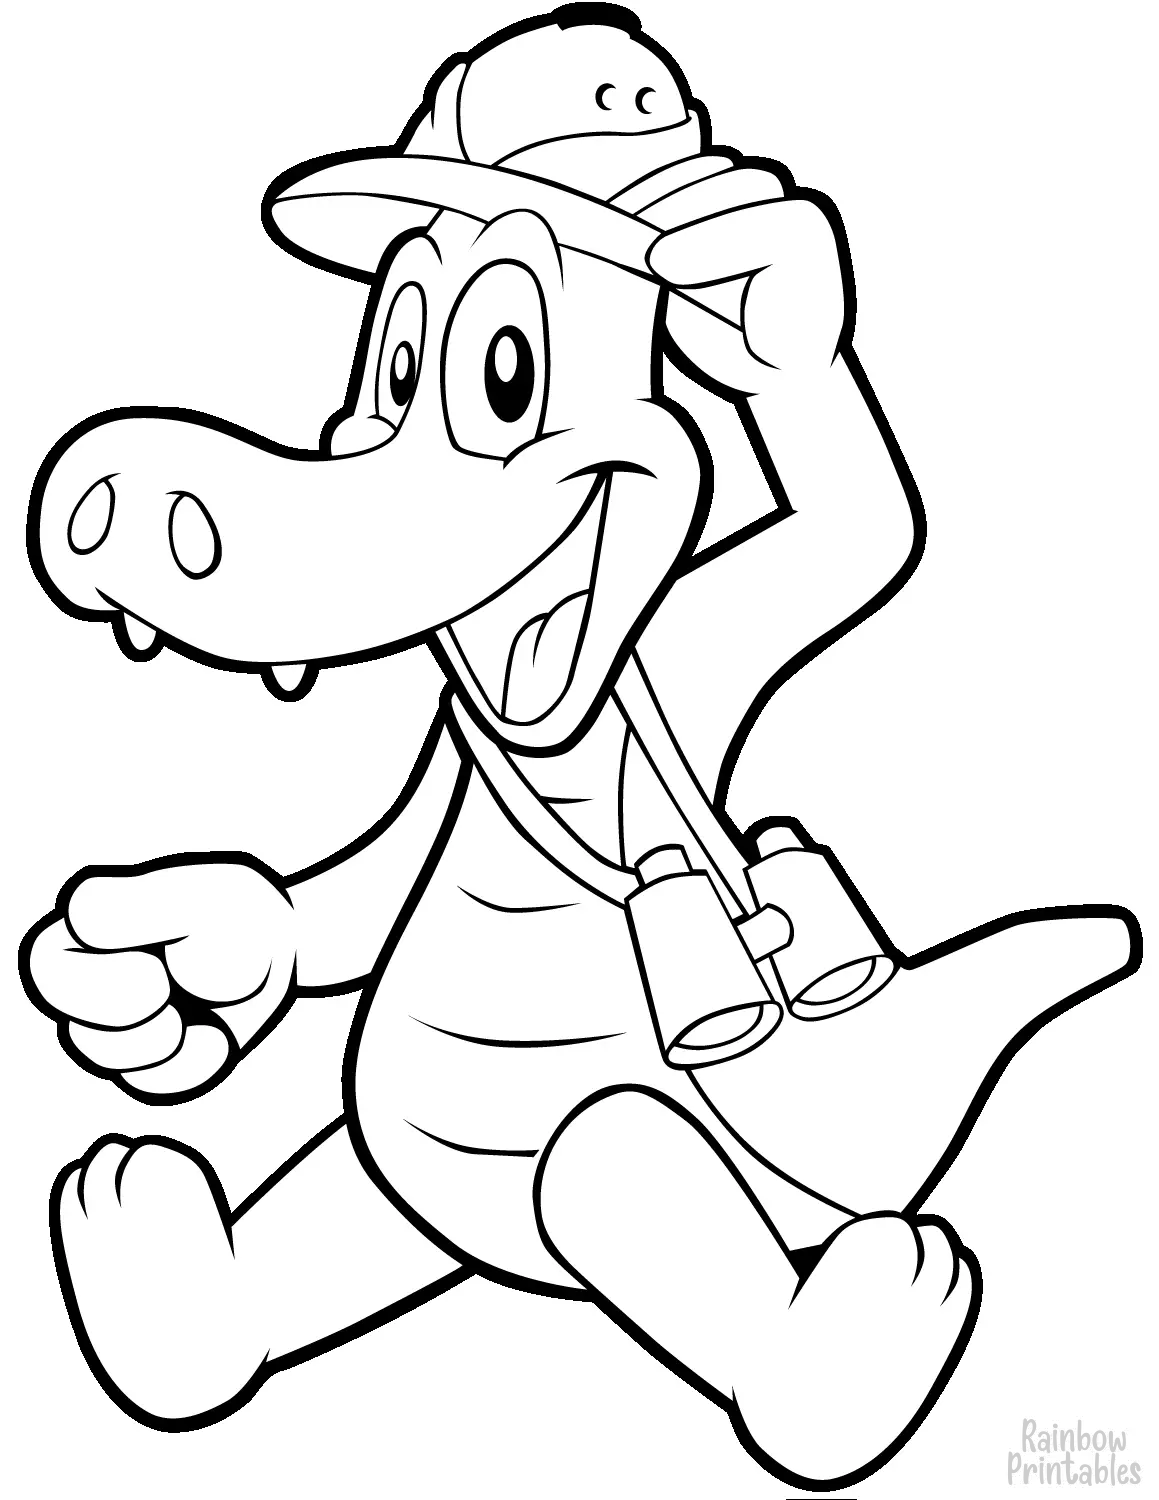 Simple-easy-great-for-children-cute-cartoon-alligator-coloring-page-Simple Easy Color Animal Pages for Kids